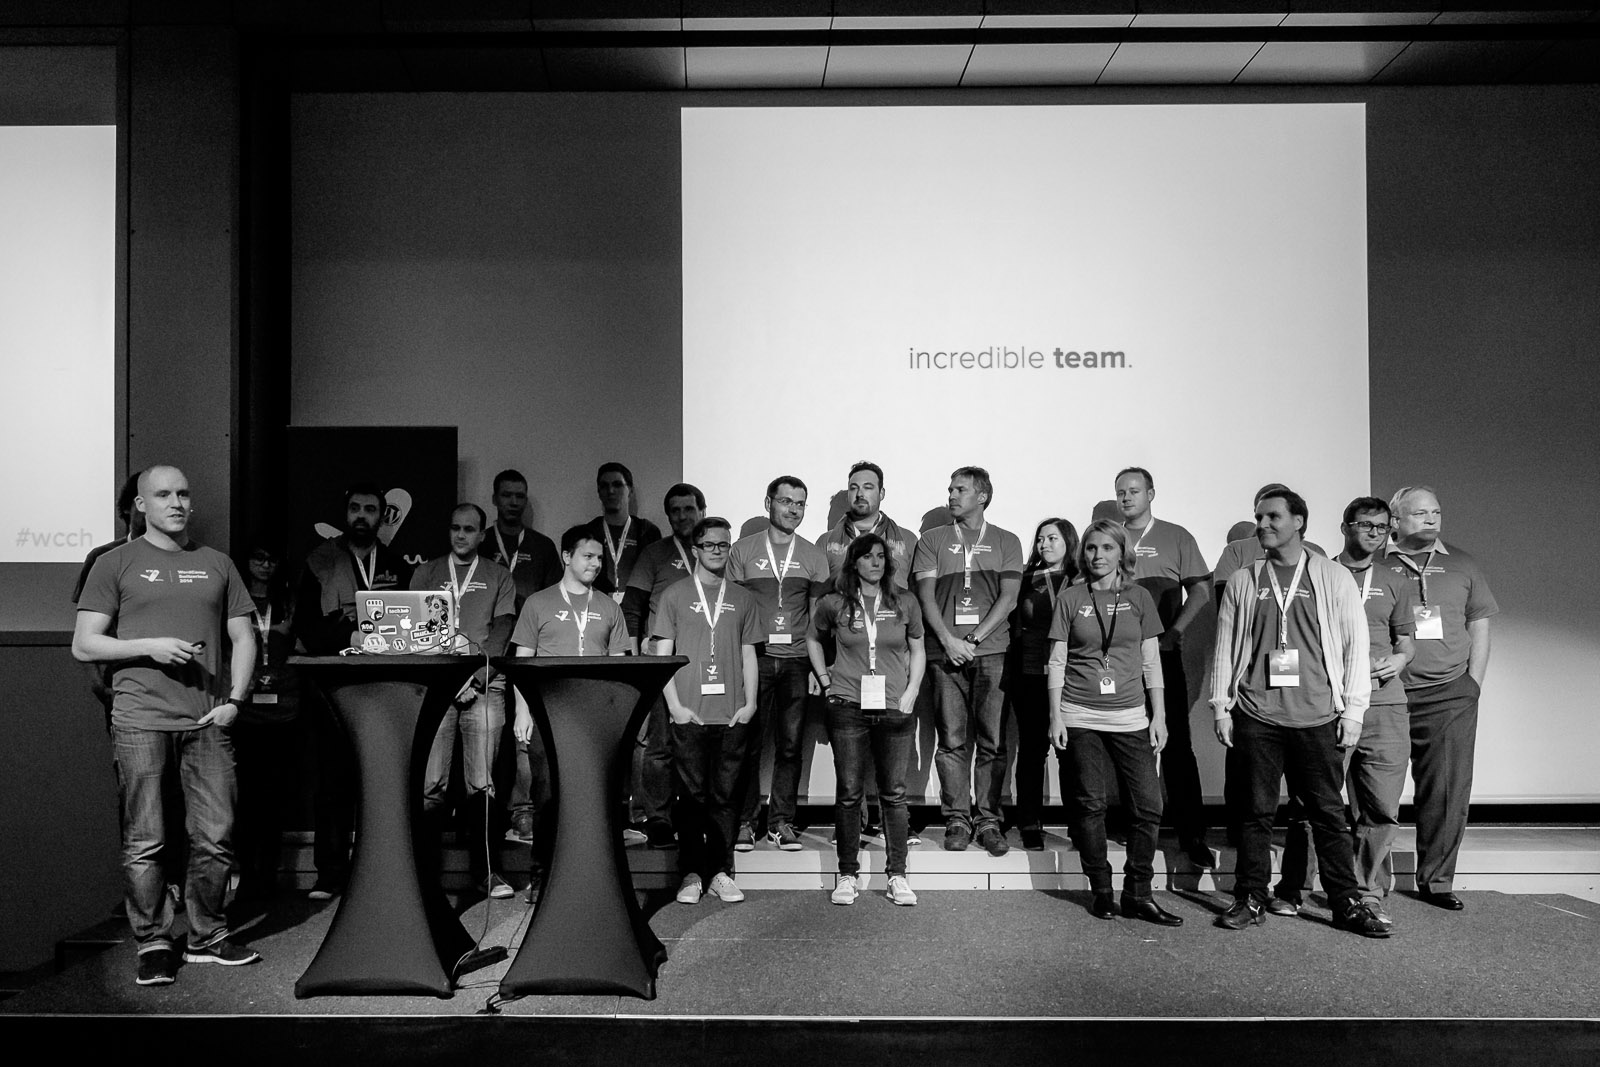 Incredible team. Thanks to everyone that made #wcch happen.